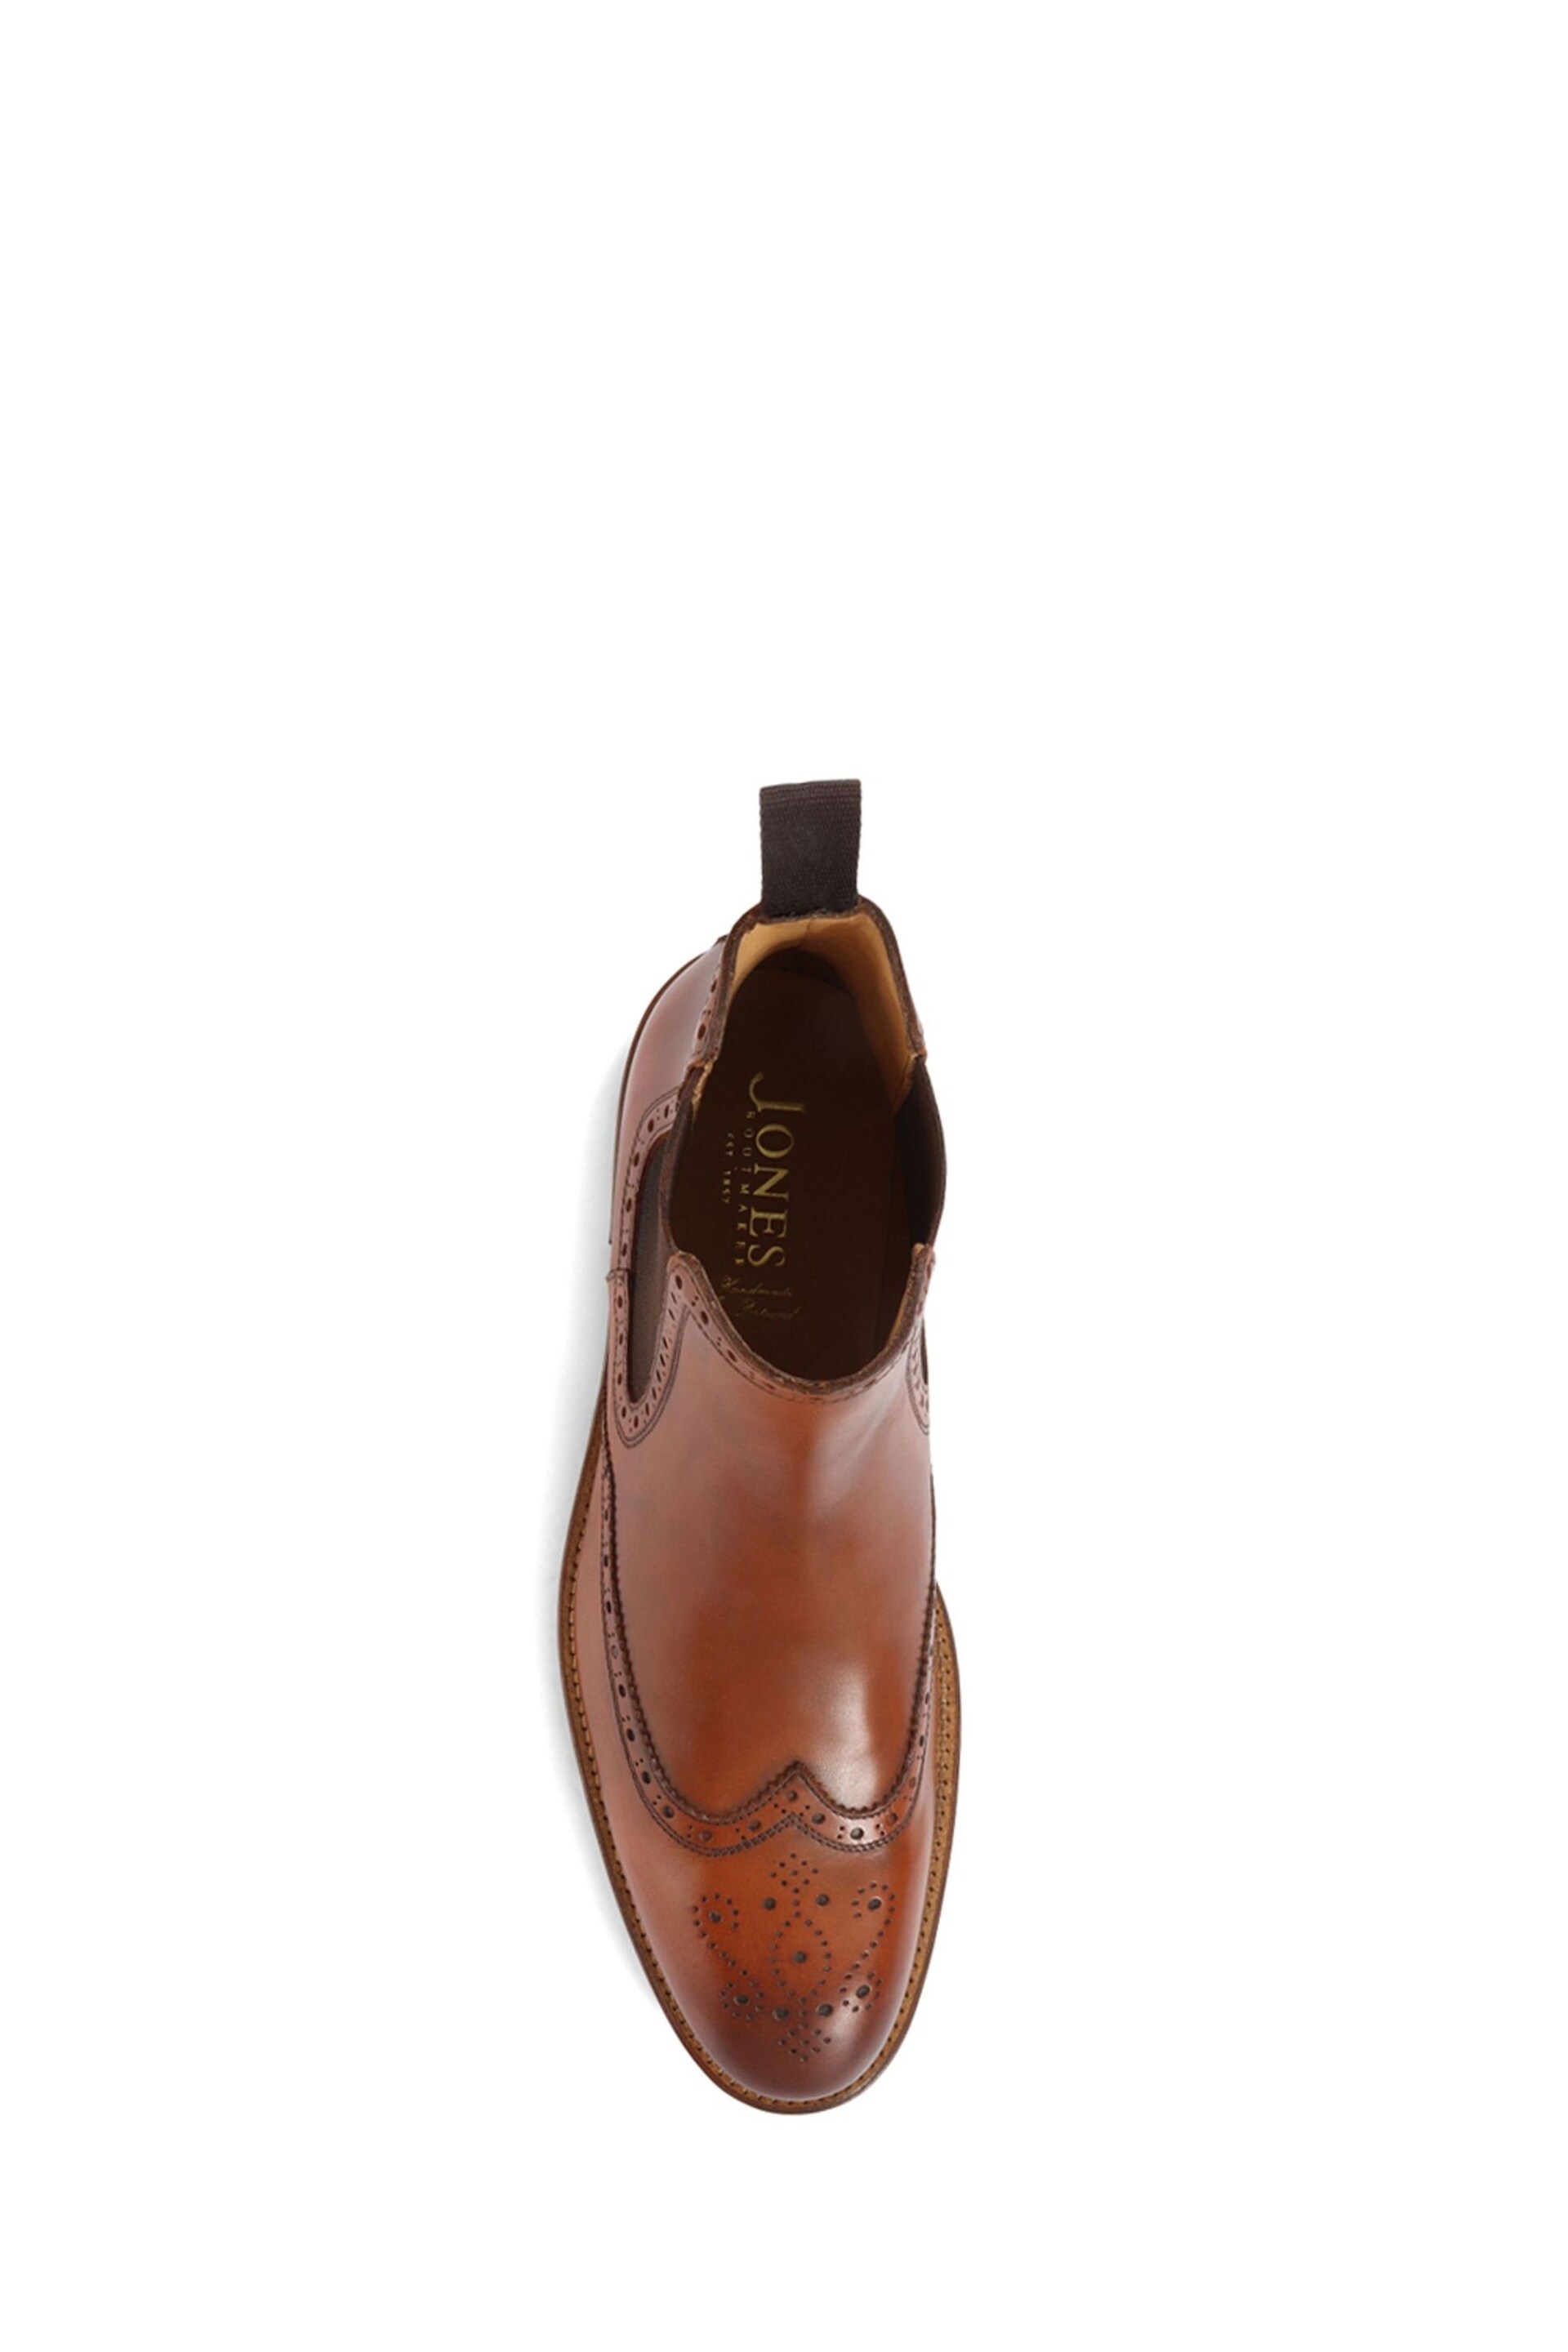 Jones Bootmaker Natural Barnet Goodyear Welted Leather Oxford Shoes - Image 4 of 5